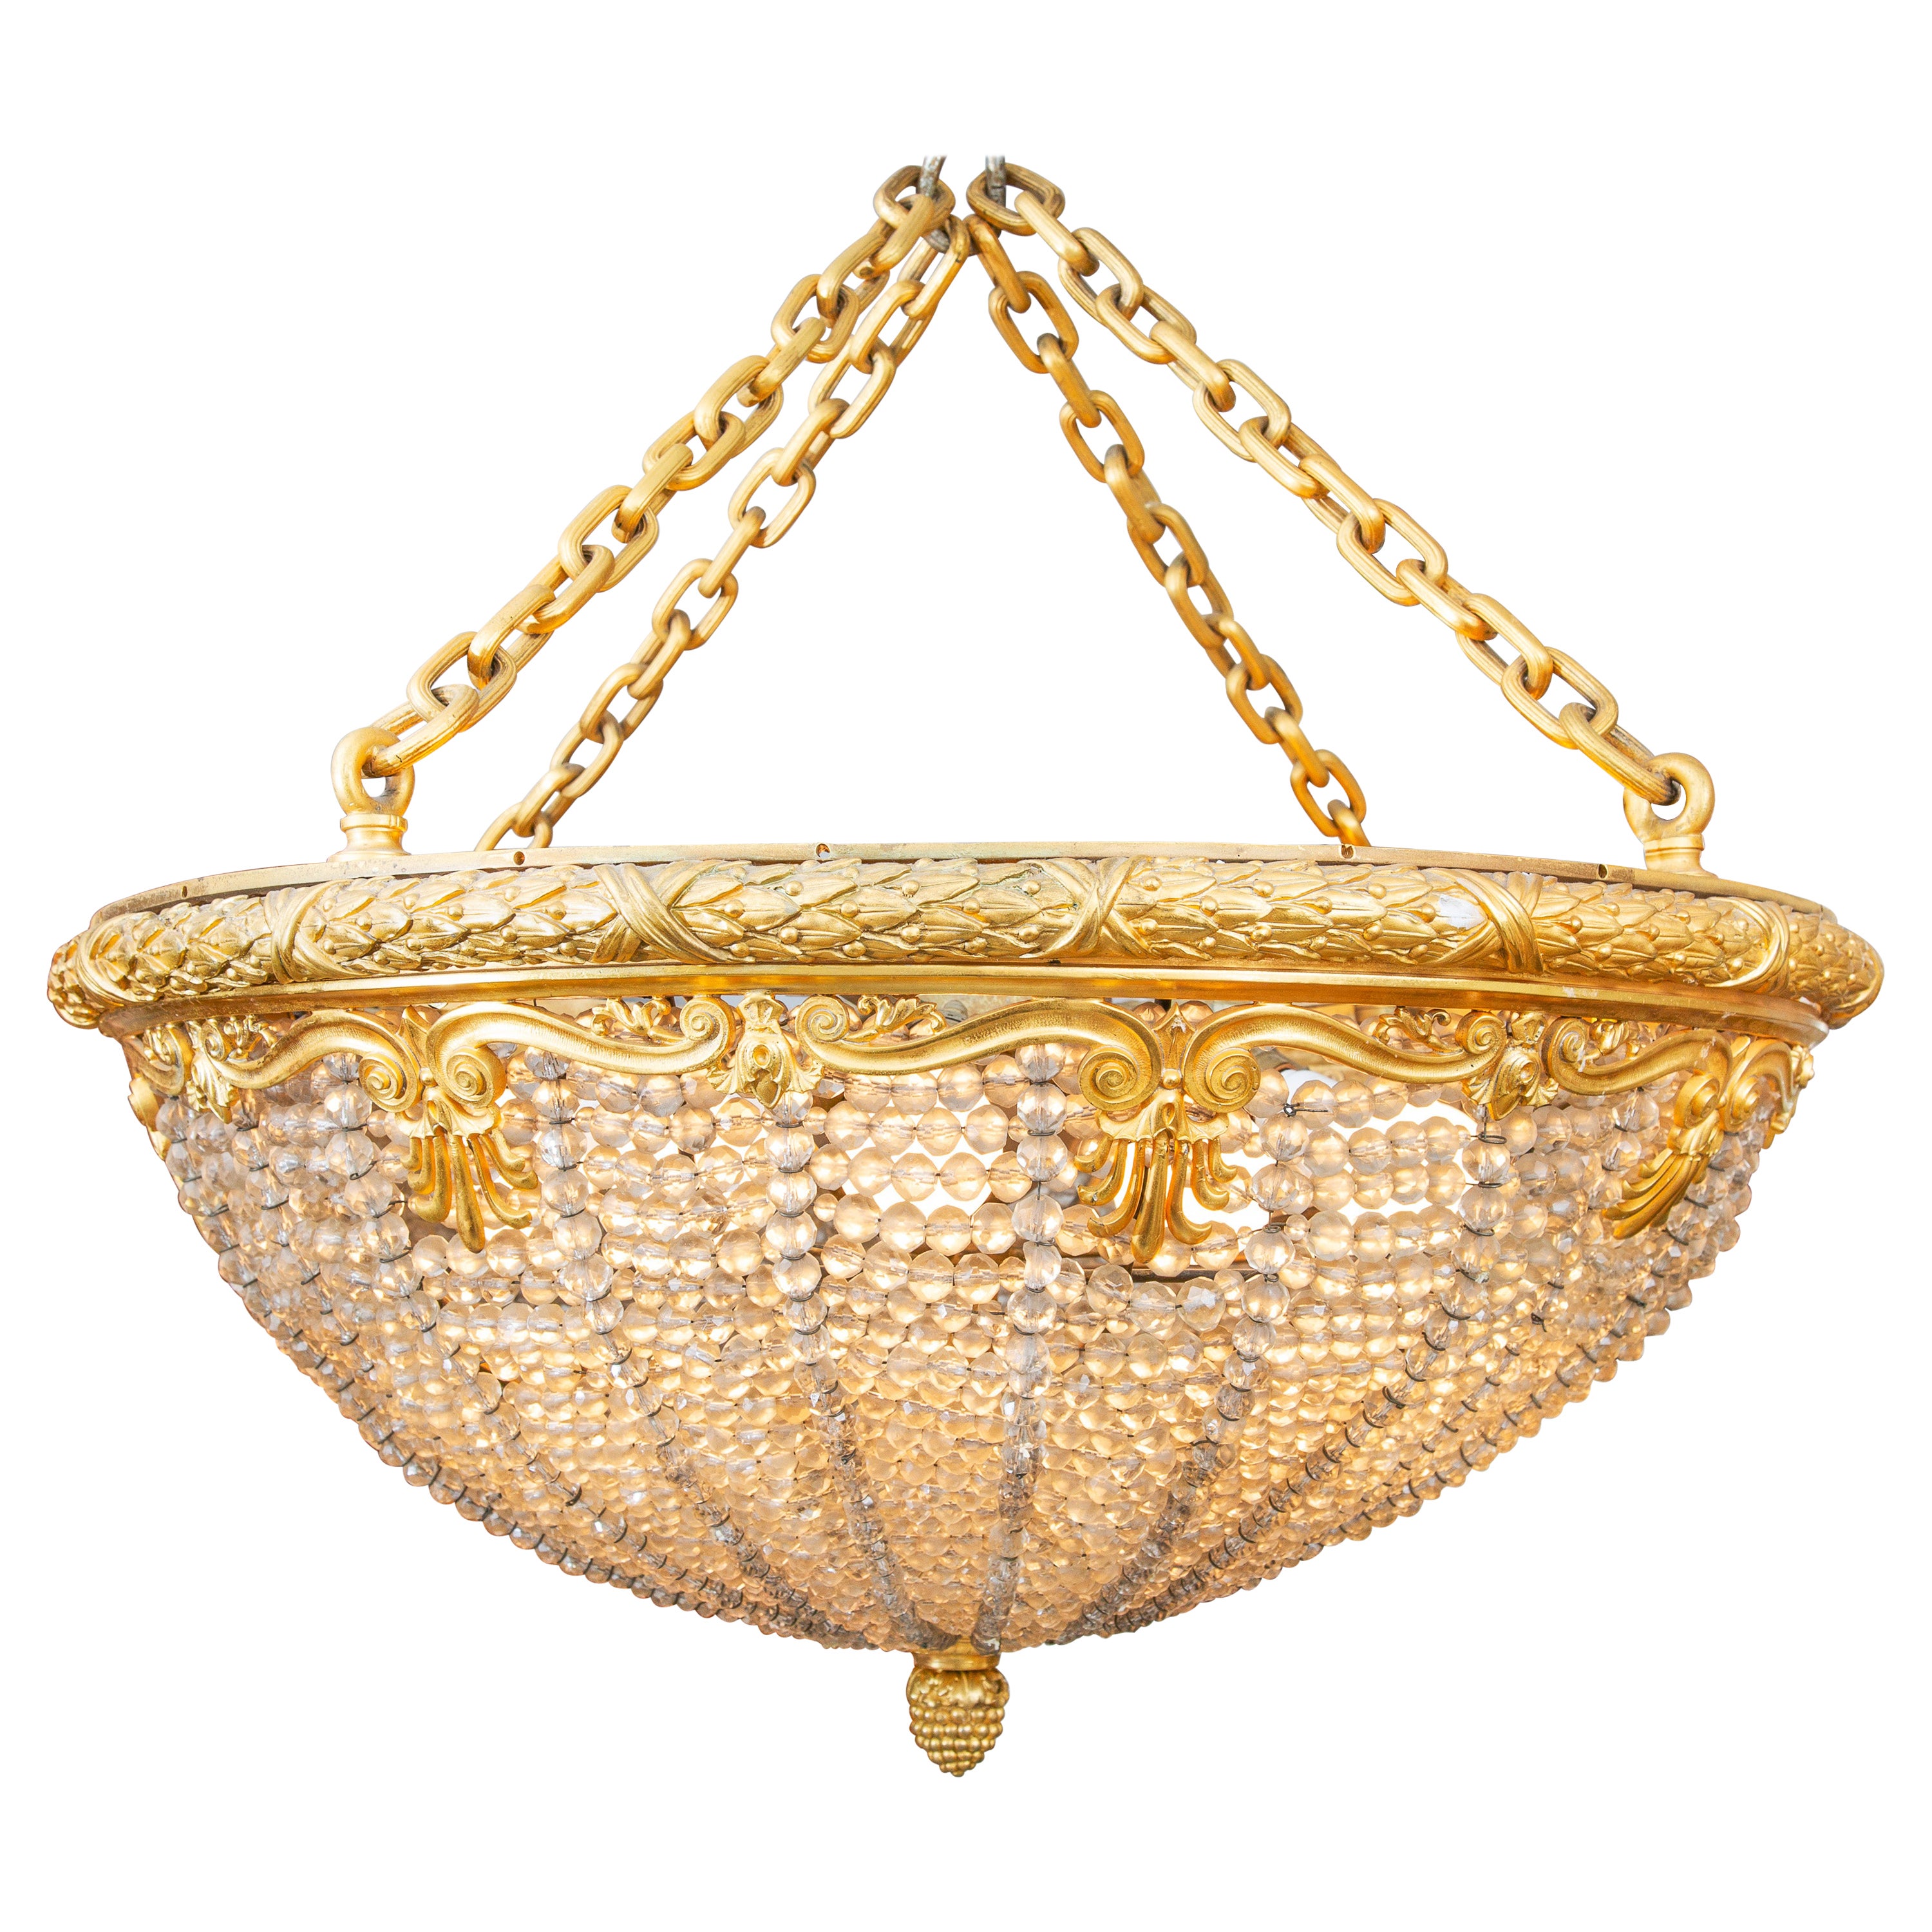 19th Century French Empire Crystal and Gilt Bronze Chandelier For Sale